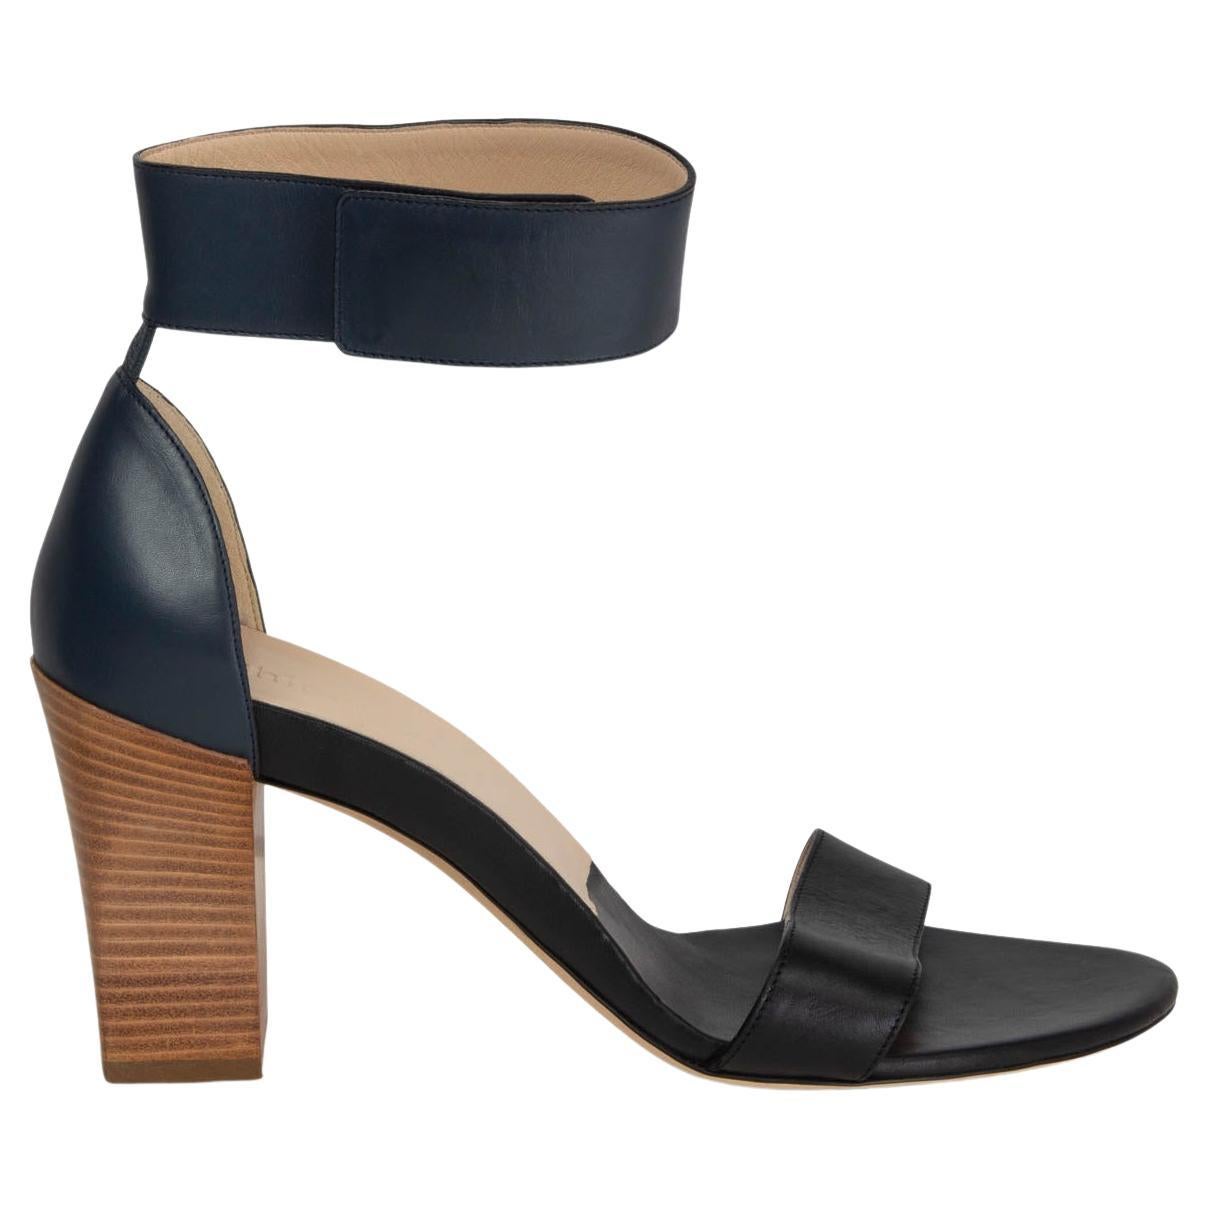 CHLOE navy blue & black TWO TONE ANKLE STRAP Sandals Shoes 42 SEAWATER For Sale